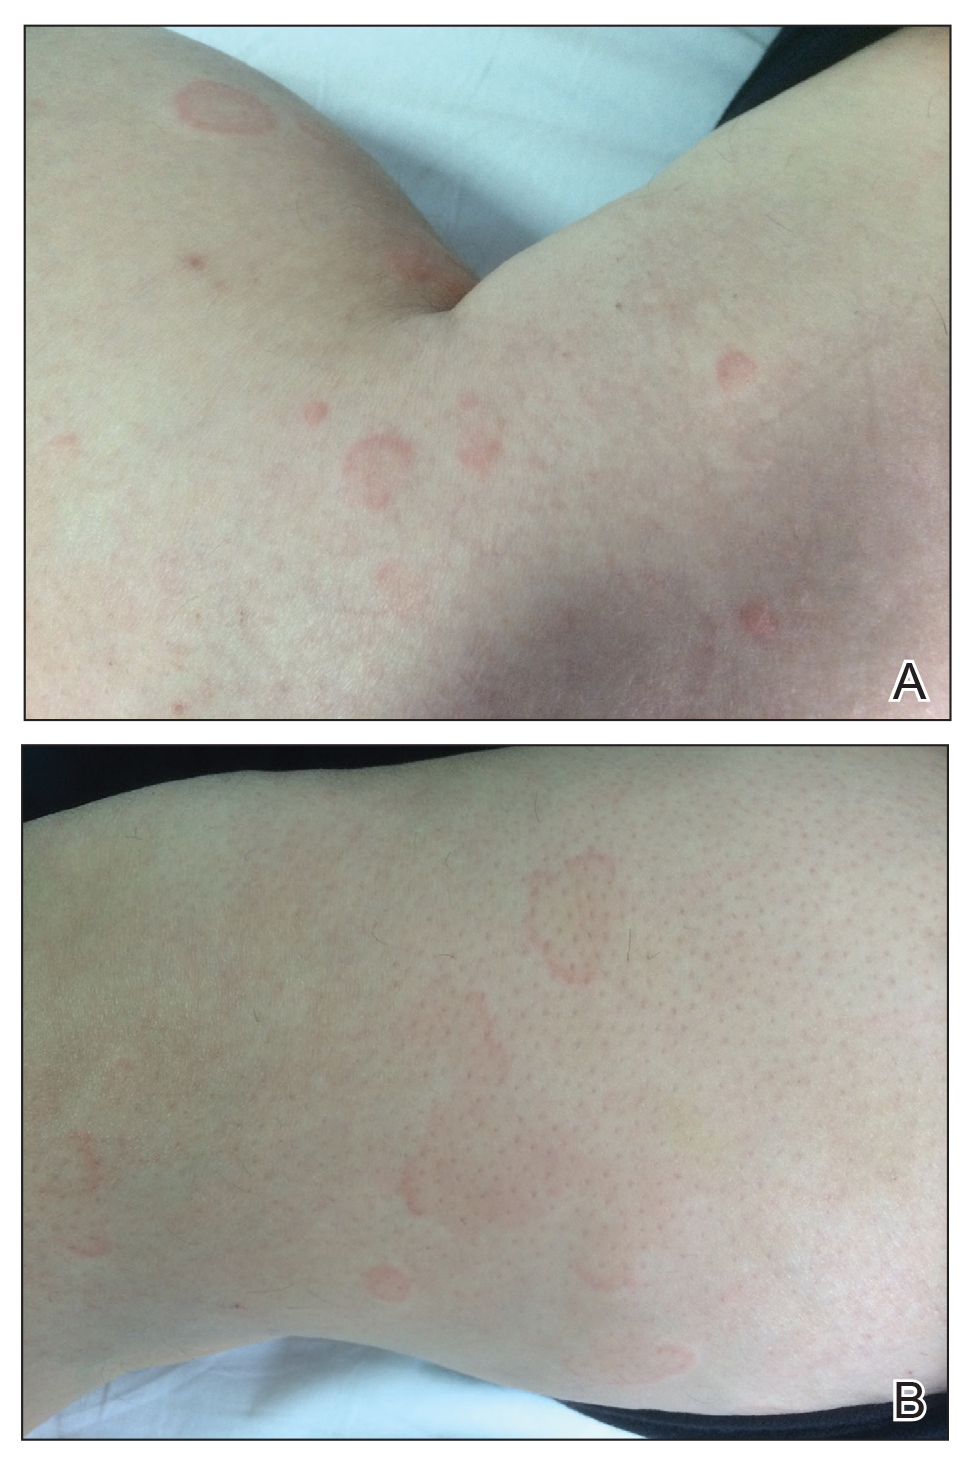 Erythematous and edematous annular papules and plaques on the arms and legs, respectively